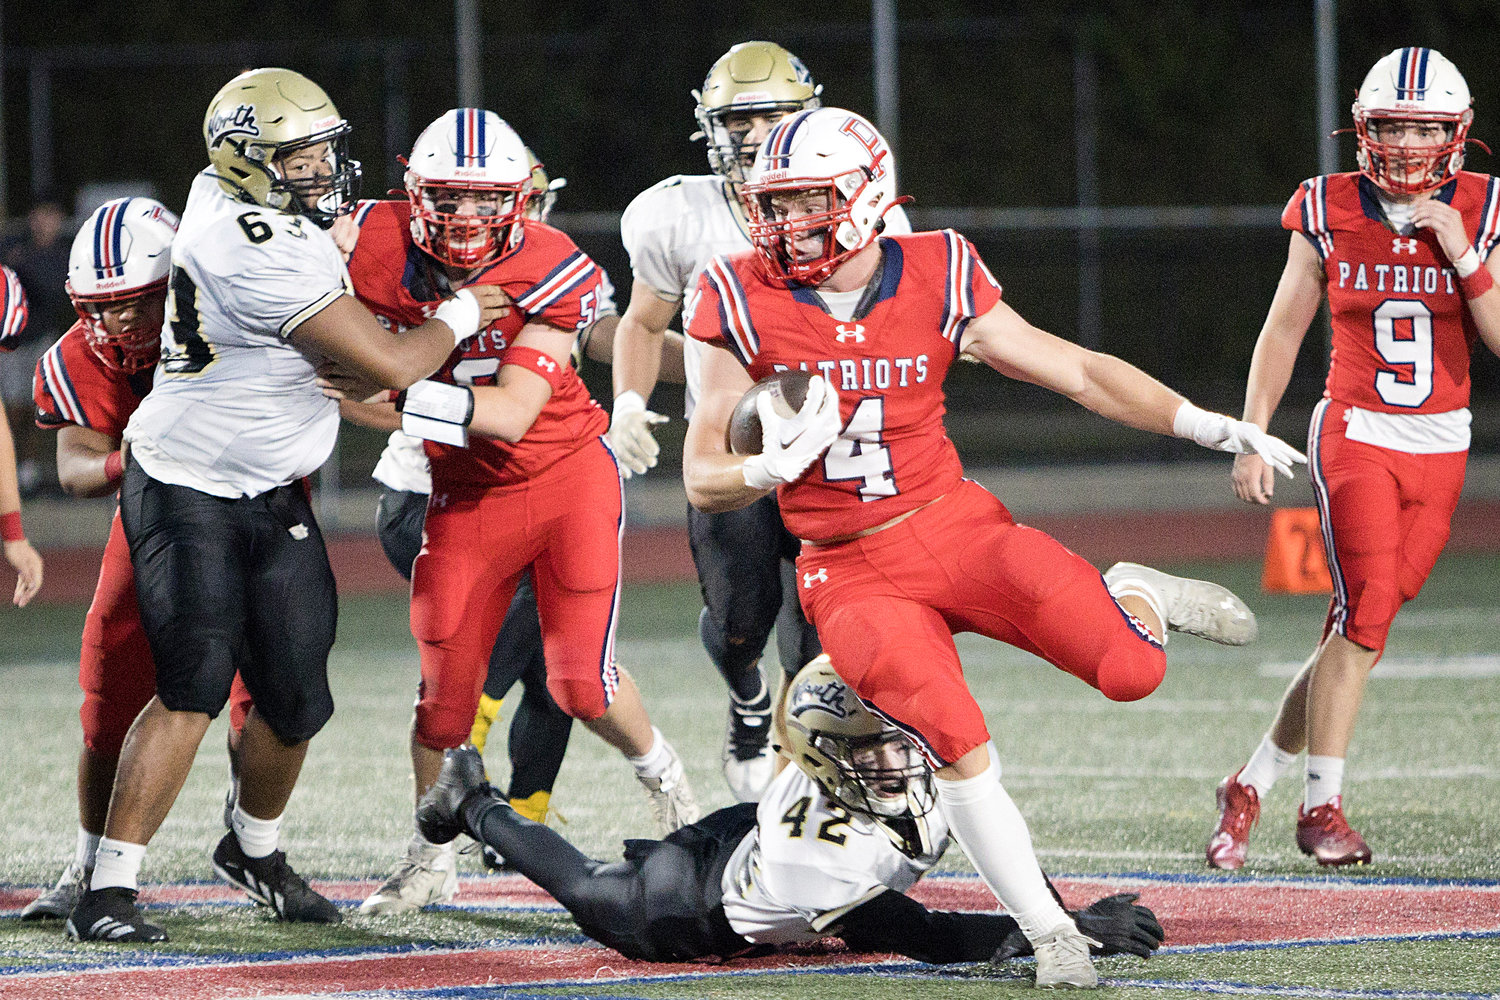 Neal Tullson barrels through the North Kingstown defense to gain yardage for the Patriots in the season-opener Friday at home. The Patriots were defeated, 20-0.